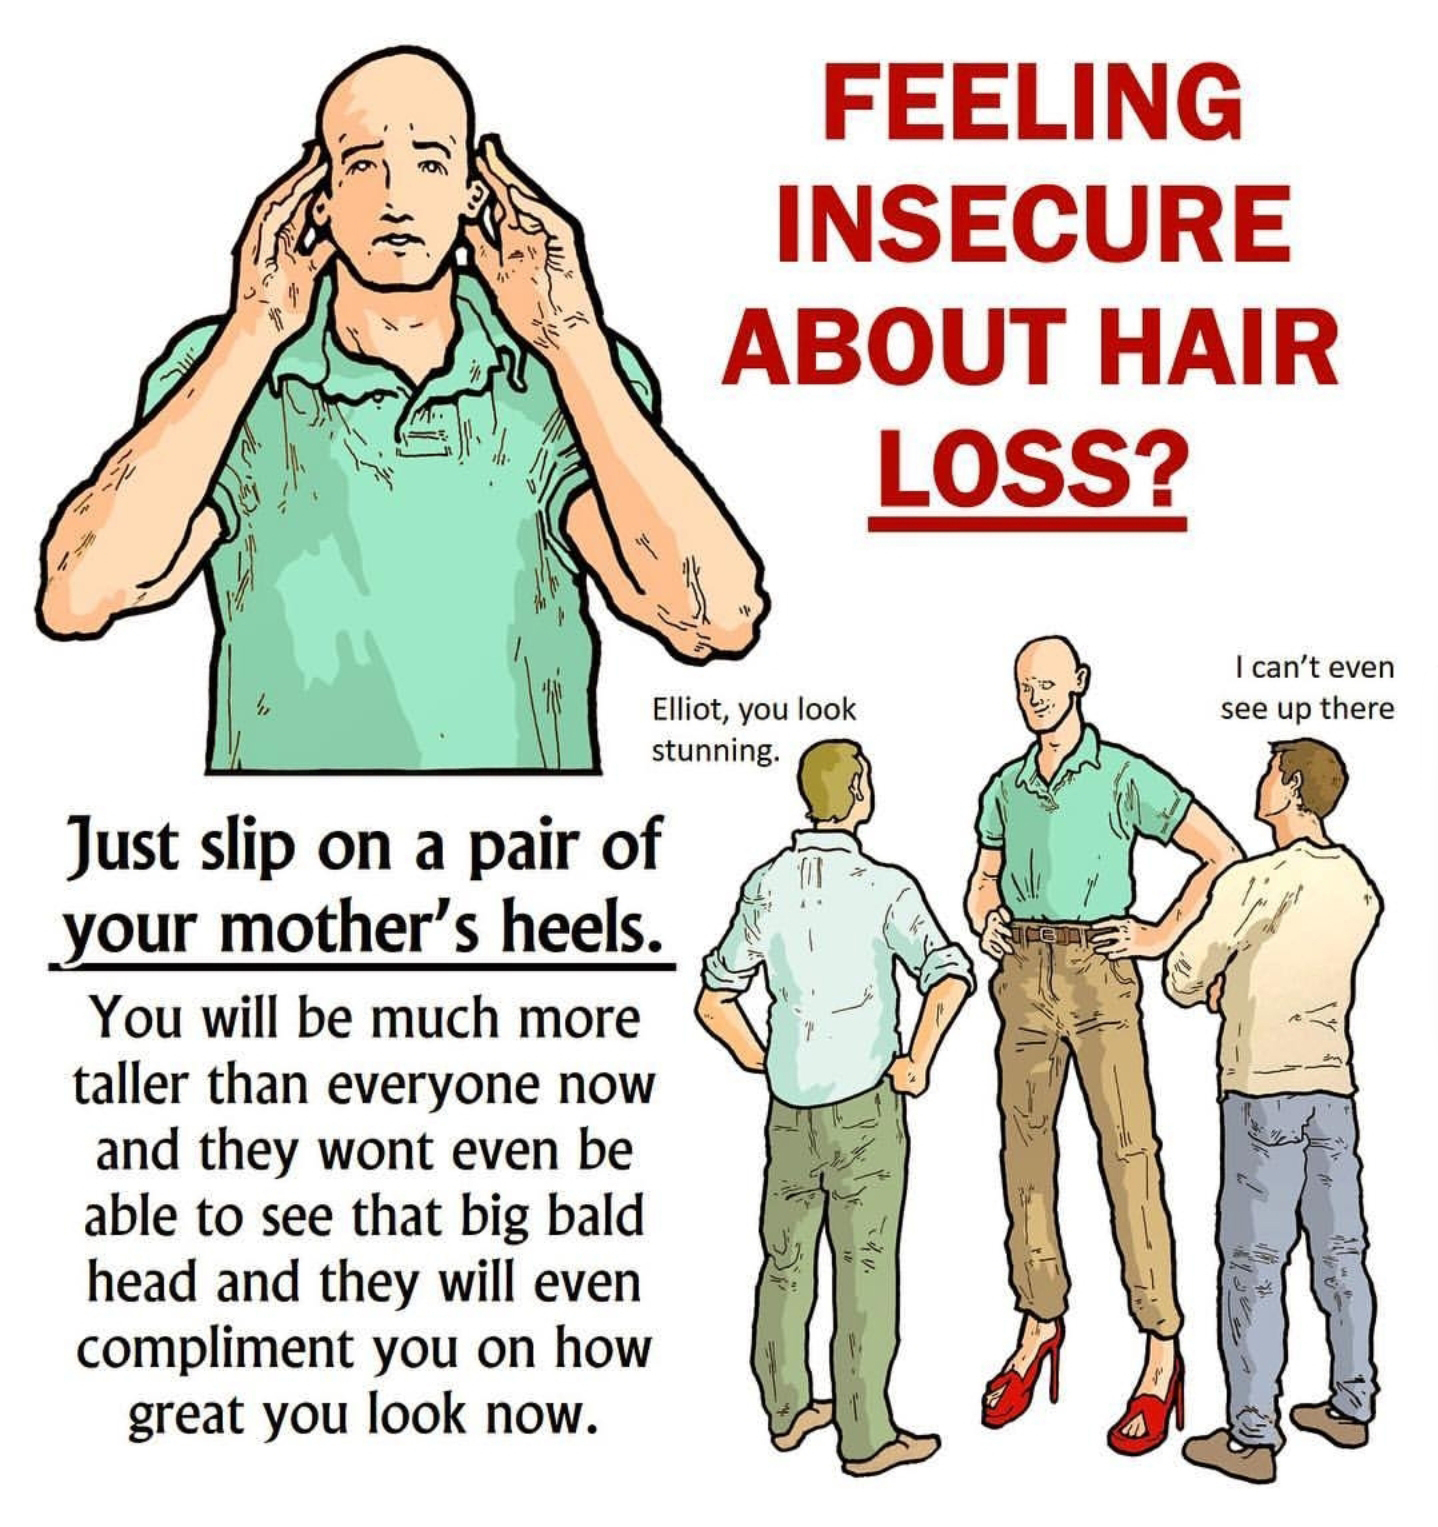 feeling insecure about hair loss meme - Feeling Insecure About Hair Loss? I can't even see up there Elliot, you look stunning Just slip on a pair of your mother's heels. You will be much more taller than everyone now and they wont even be able to see that